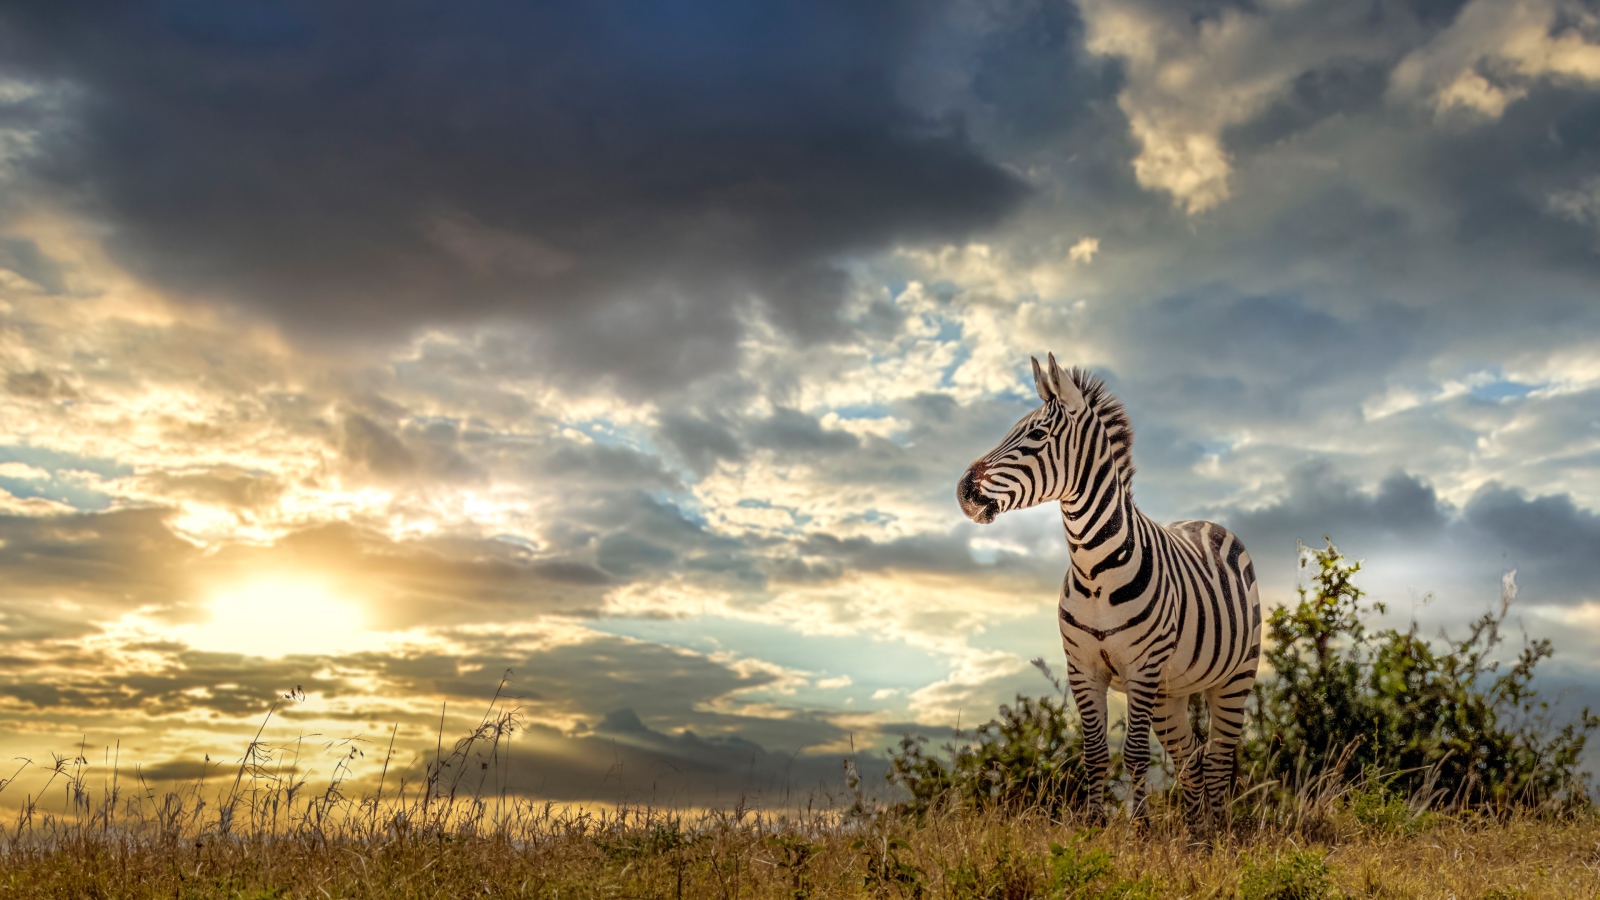 Striped zebra against the sky at sunset